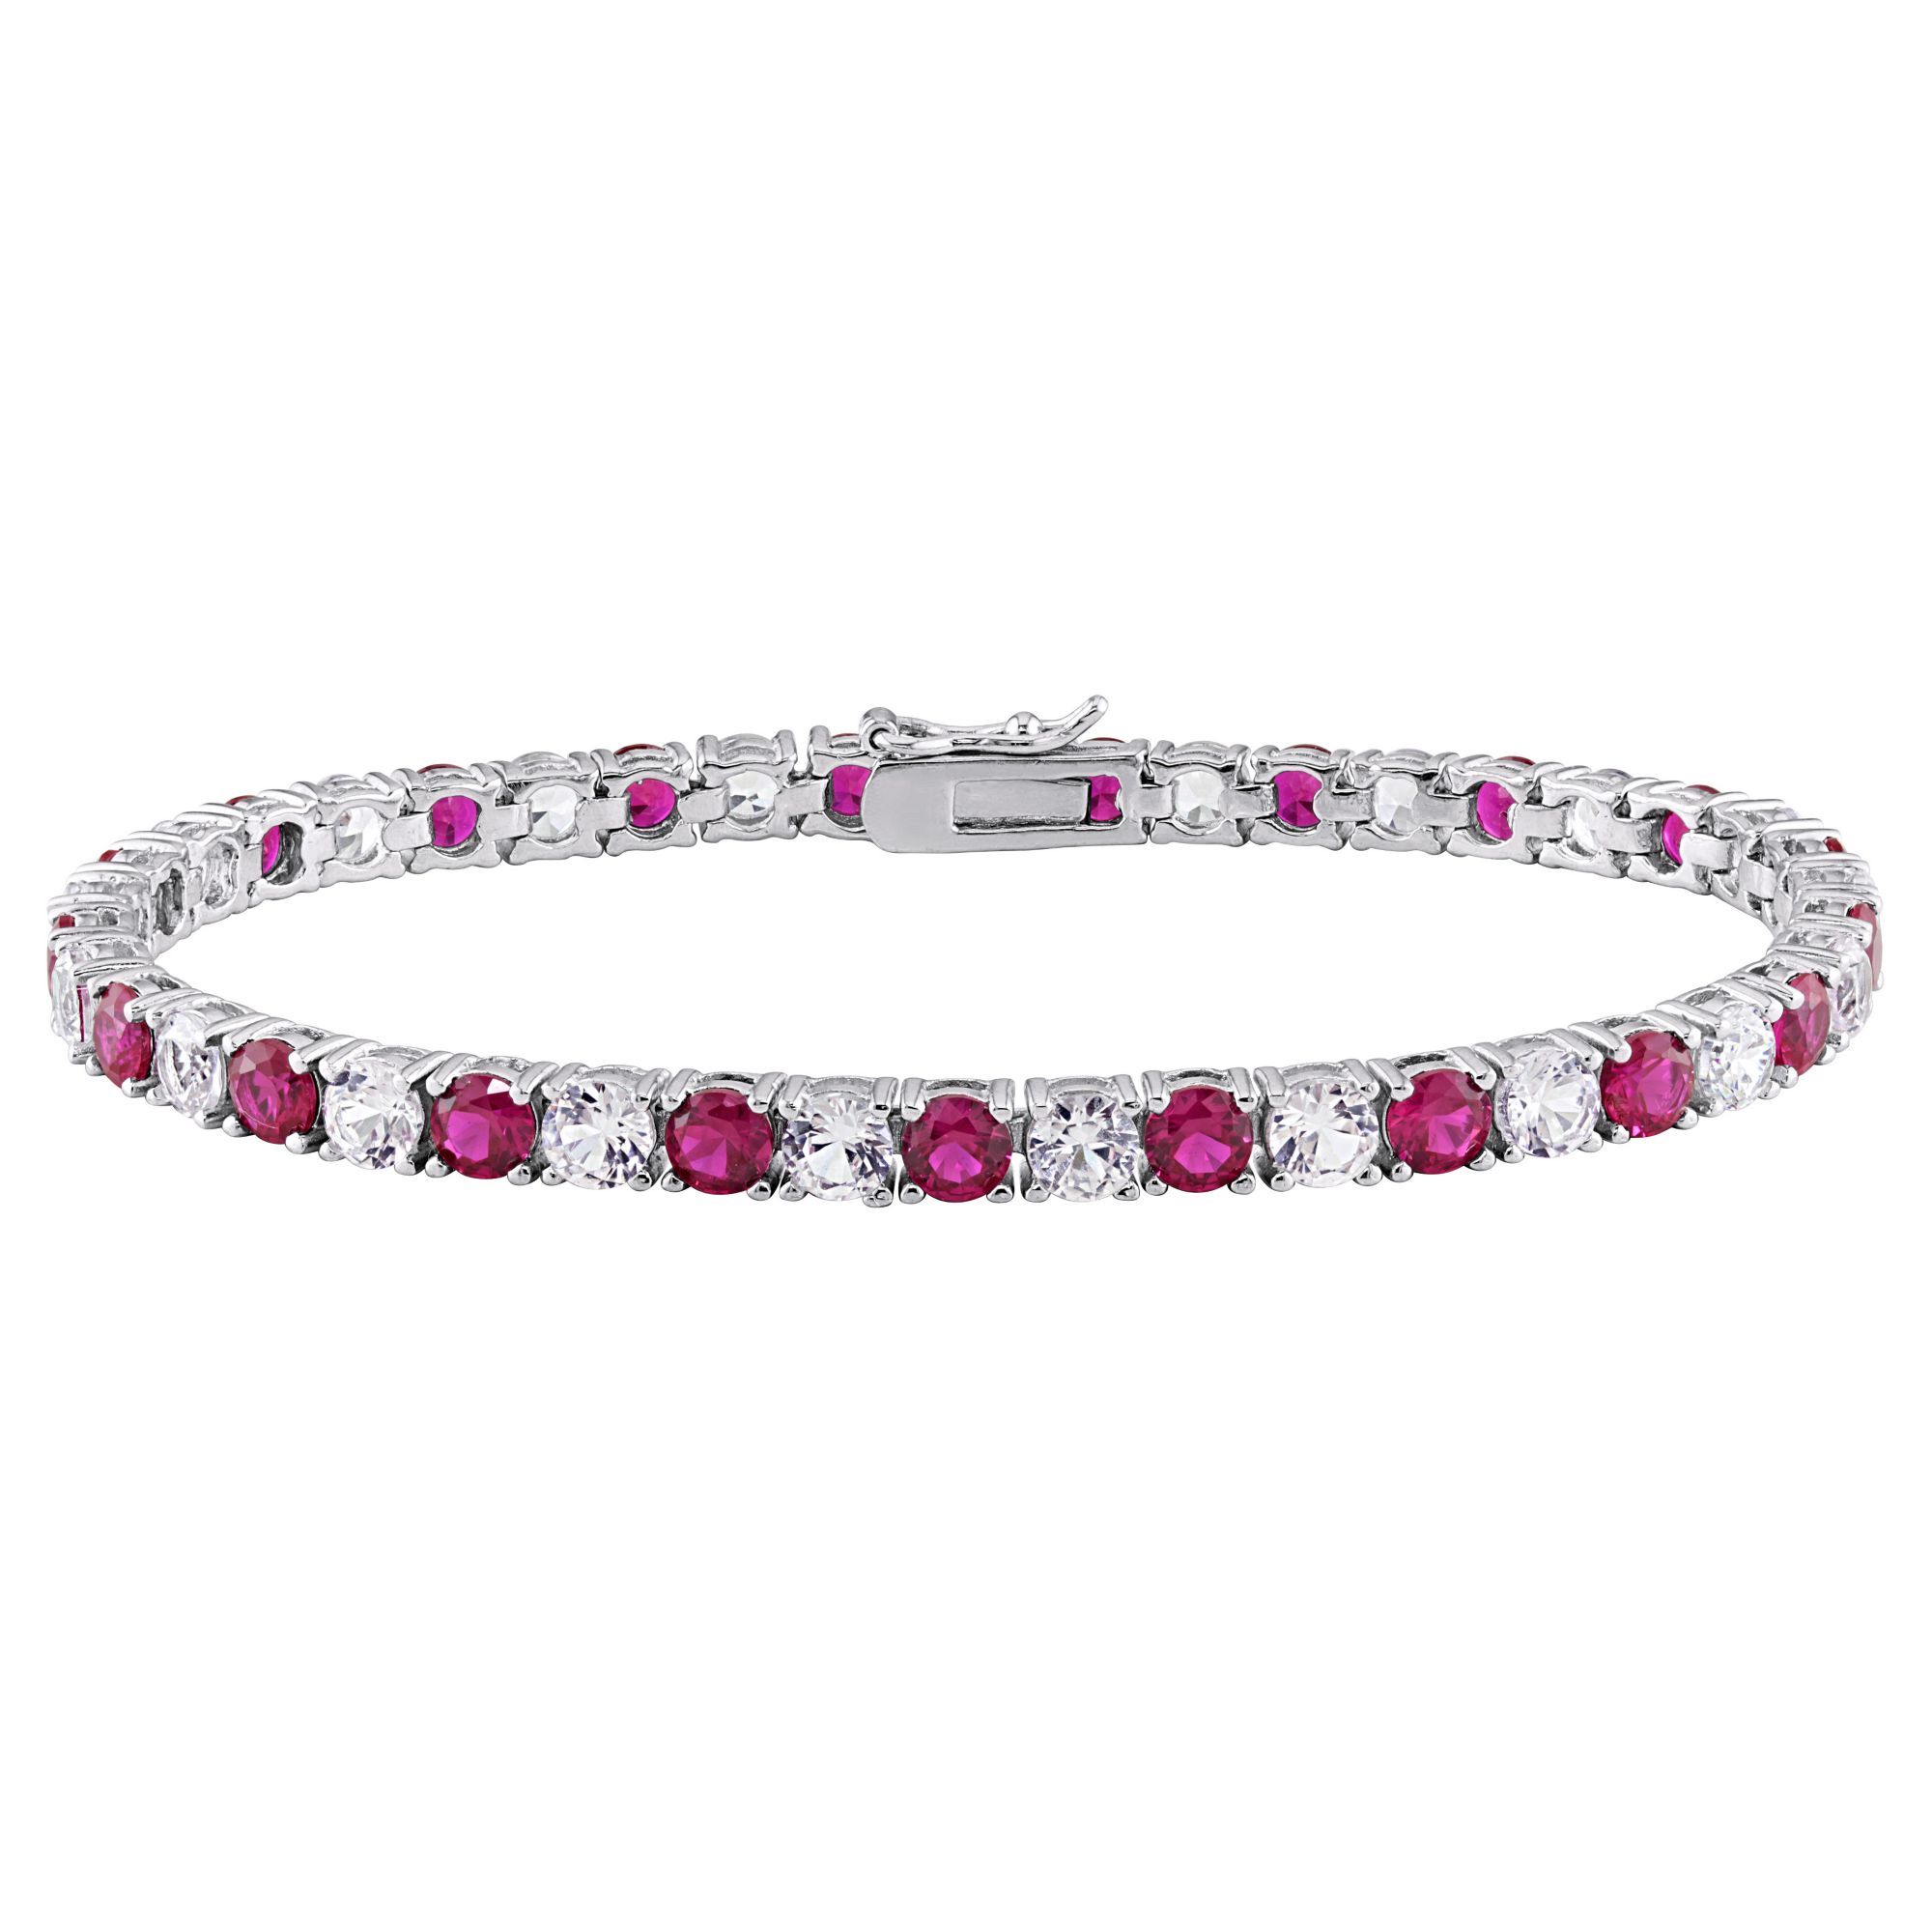 14.5 ct. t.g.w. Created Ruby and Created White Sapphire Tennis Bracelet in Sterling Silver